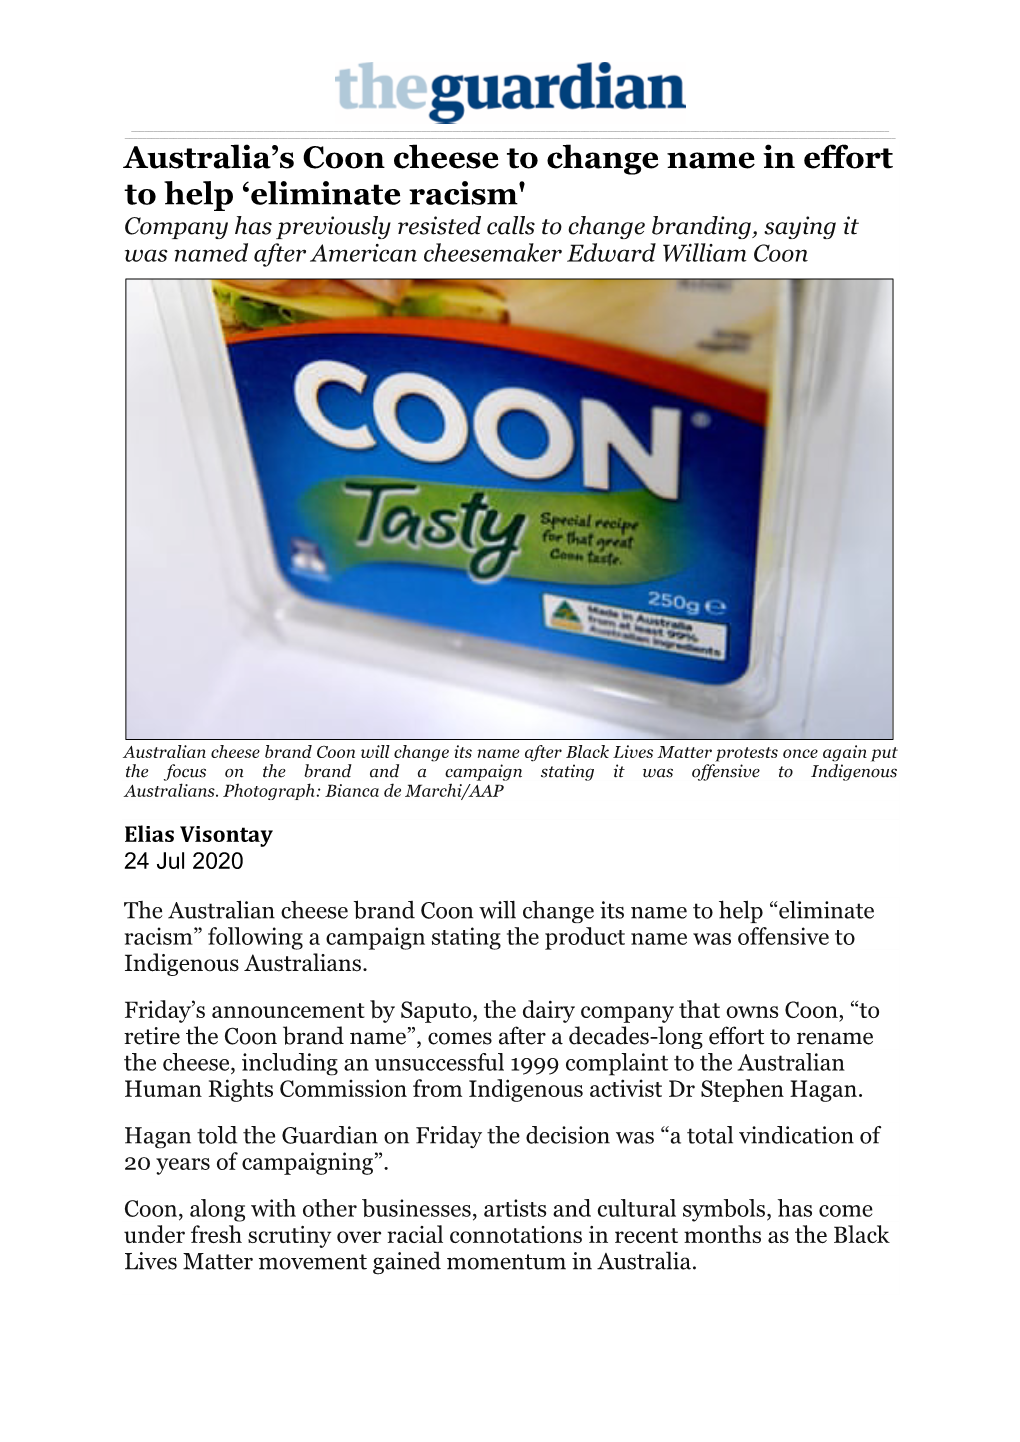 Australia's Coon Cheese to Change Name in Effort to Help 'Eliminate Racism'